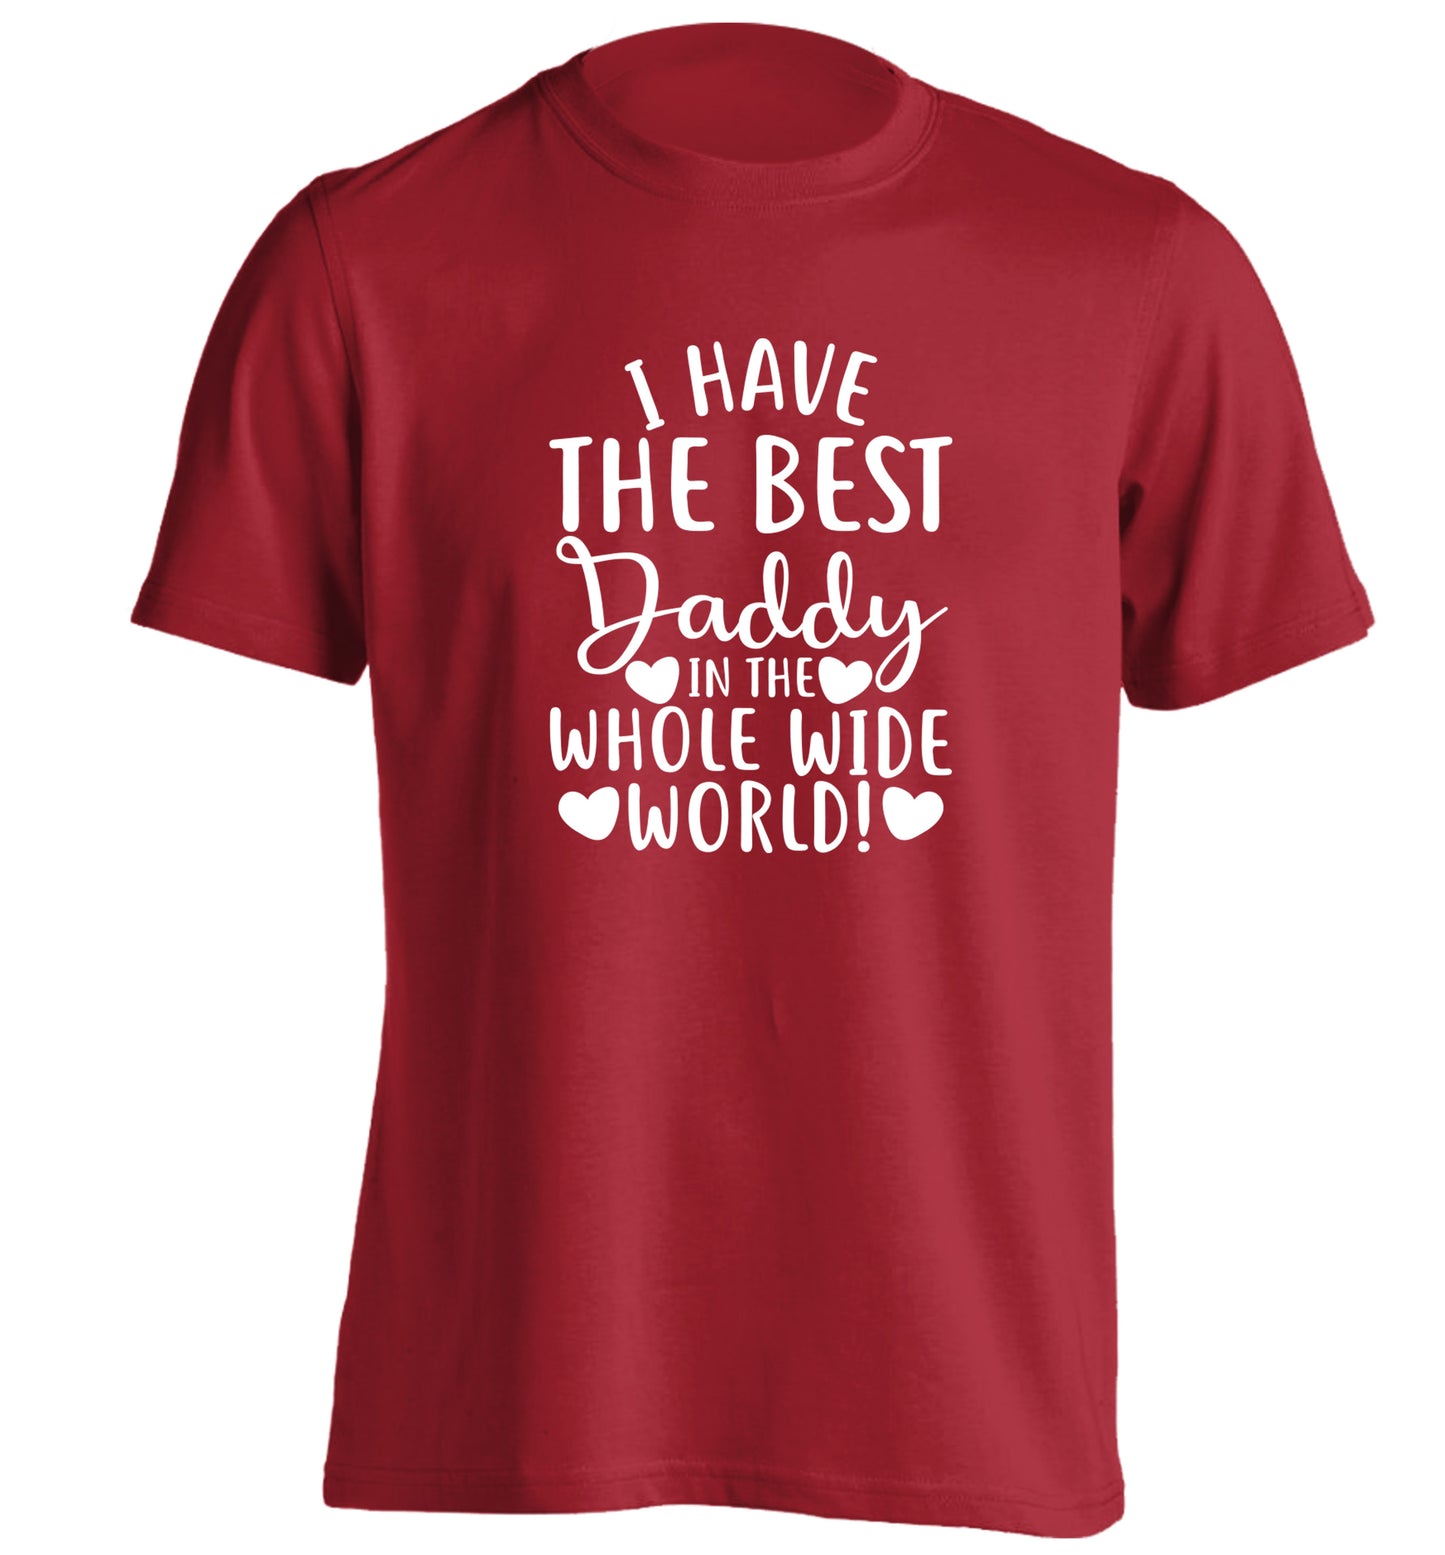 I have the best daddy in the whole wide world adults unisex red Tshirt 2XL